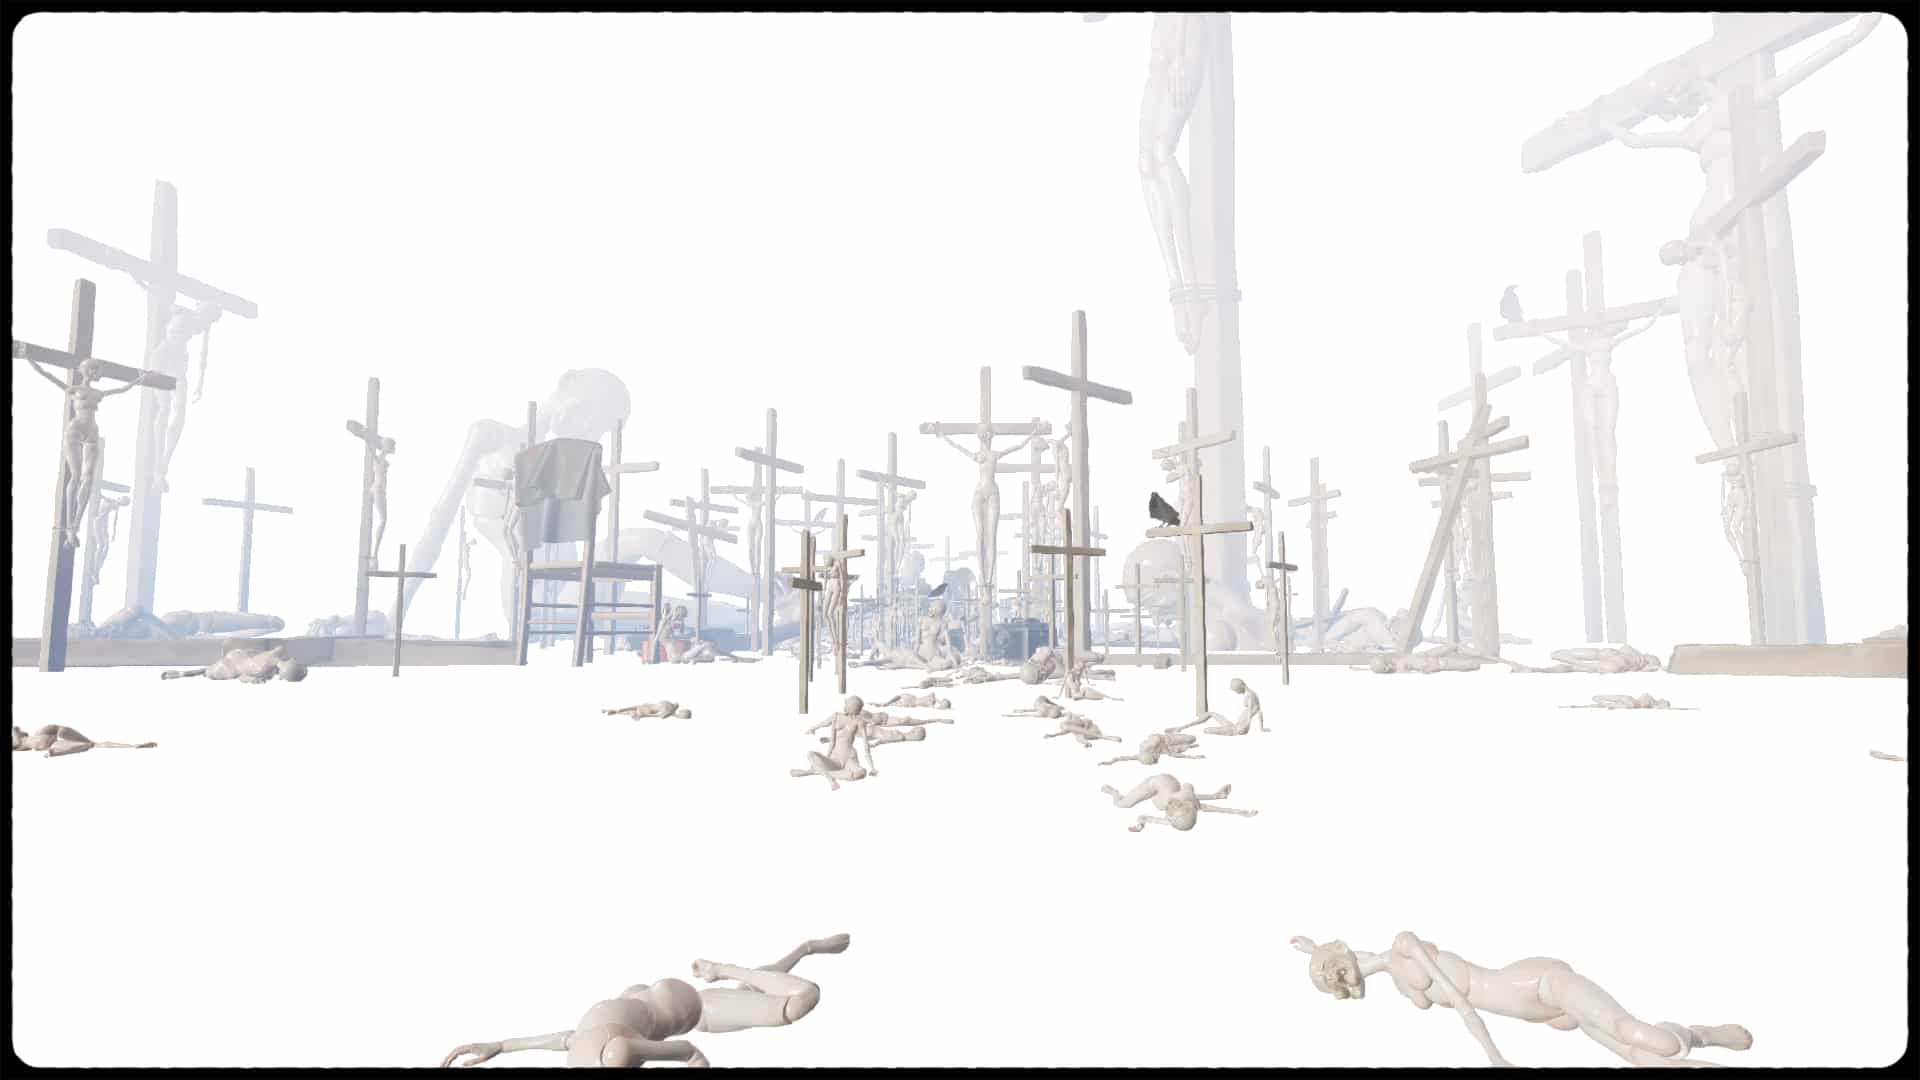 martha is dead final area with broken dolls, crucifixes and crows